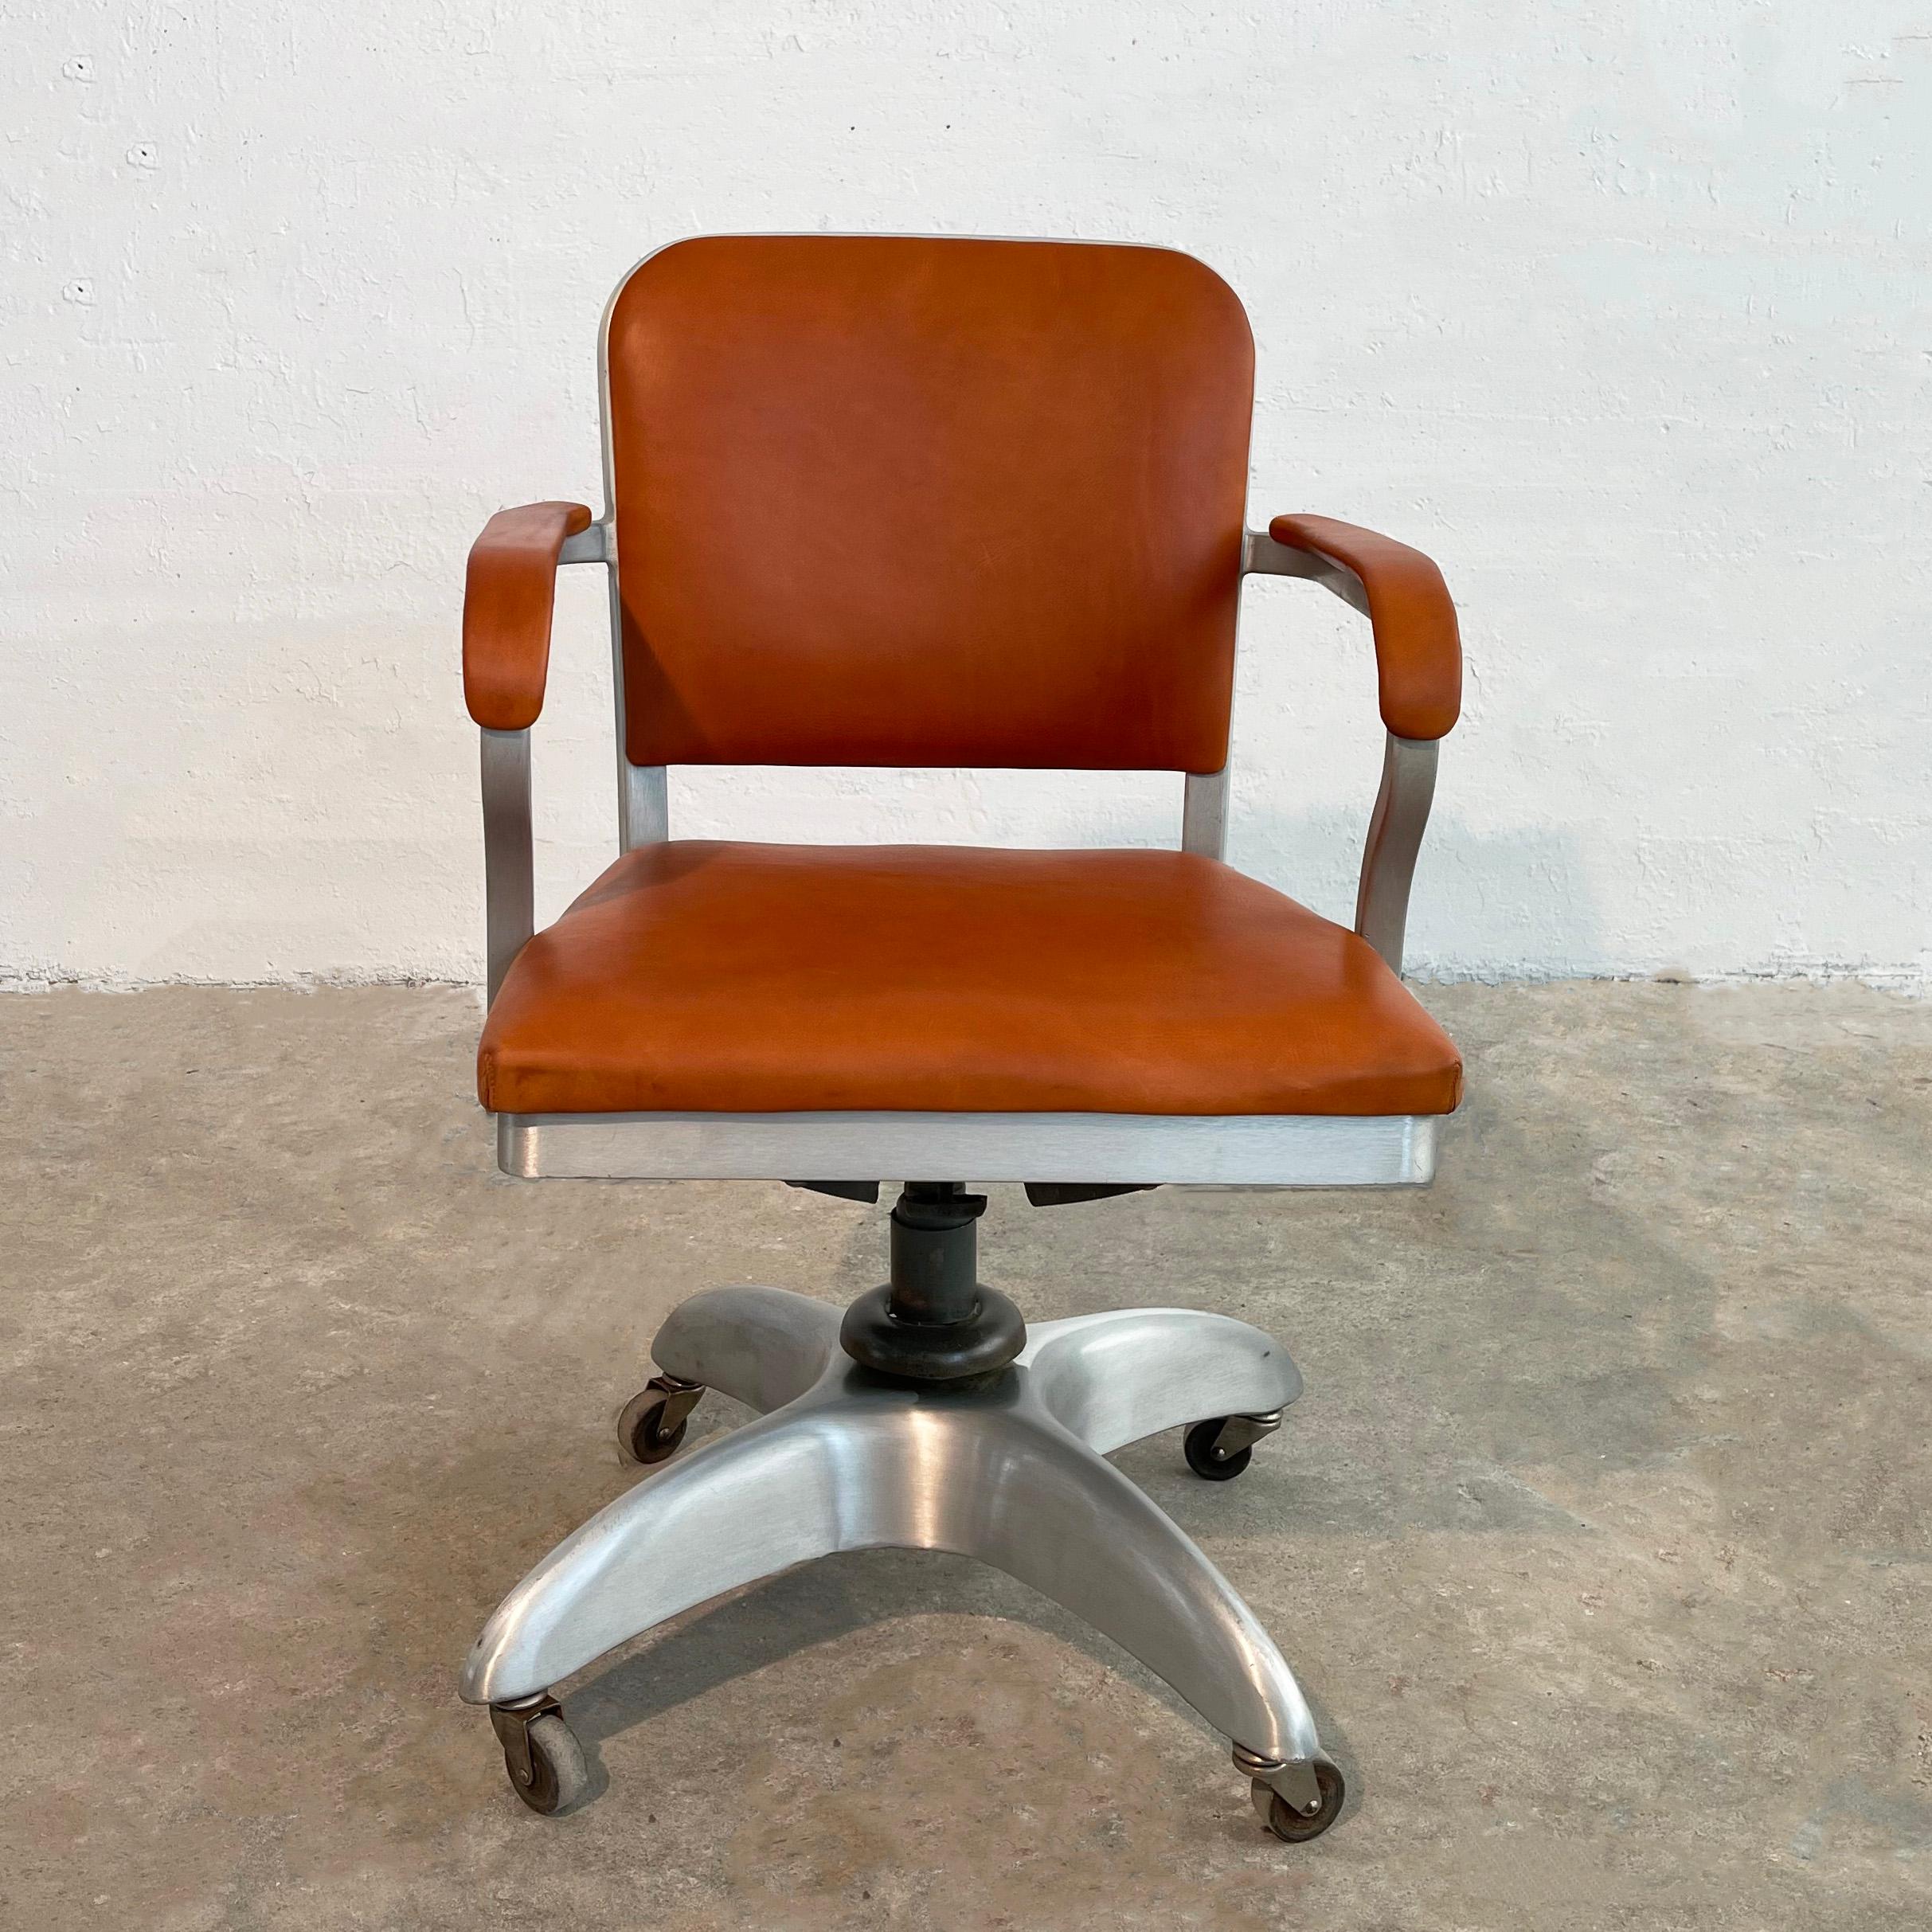 American Mid-Century Modern Leather Rolling Office Armchair By Goodform